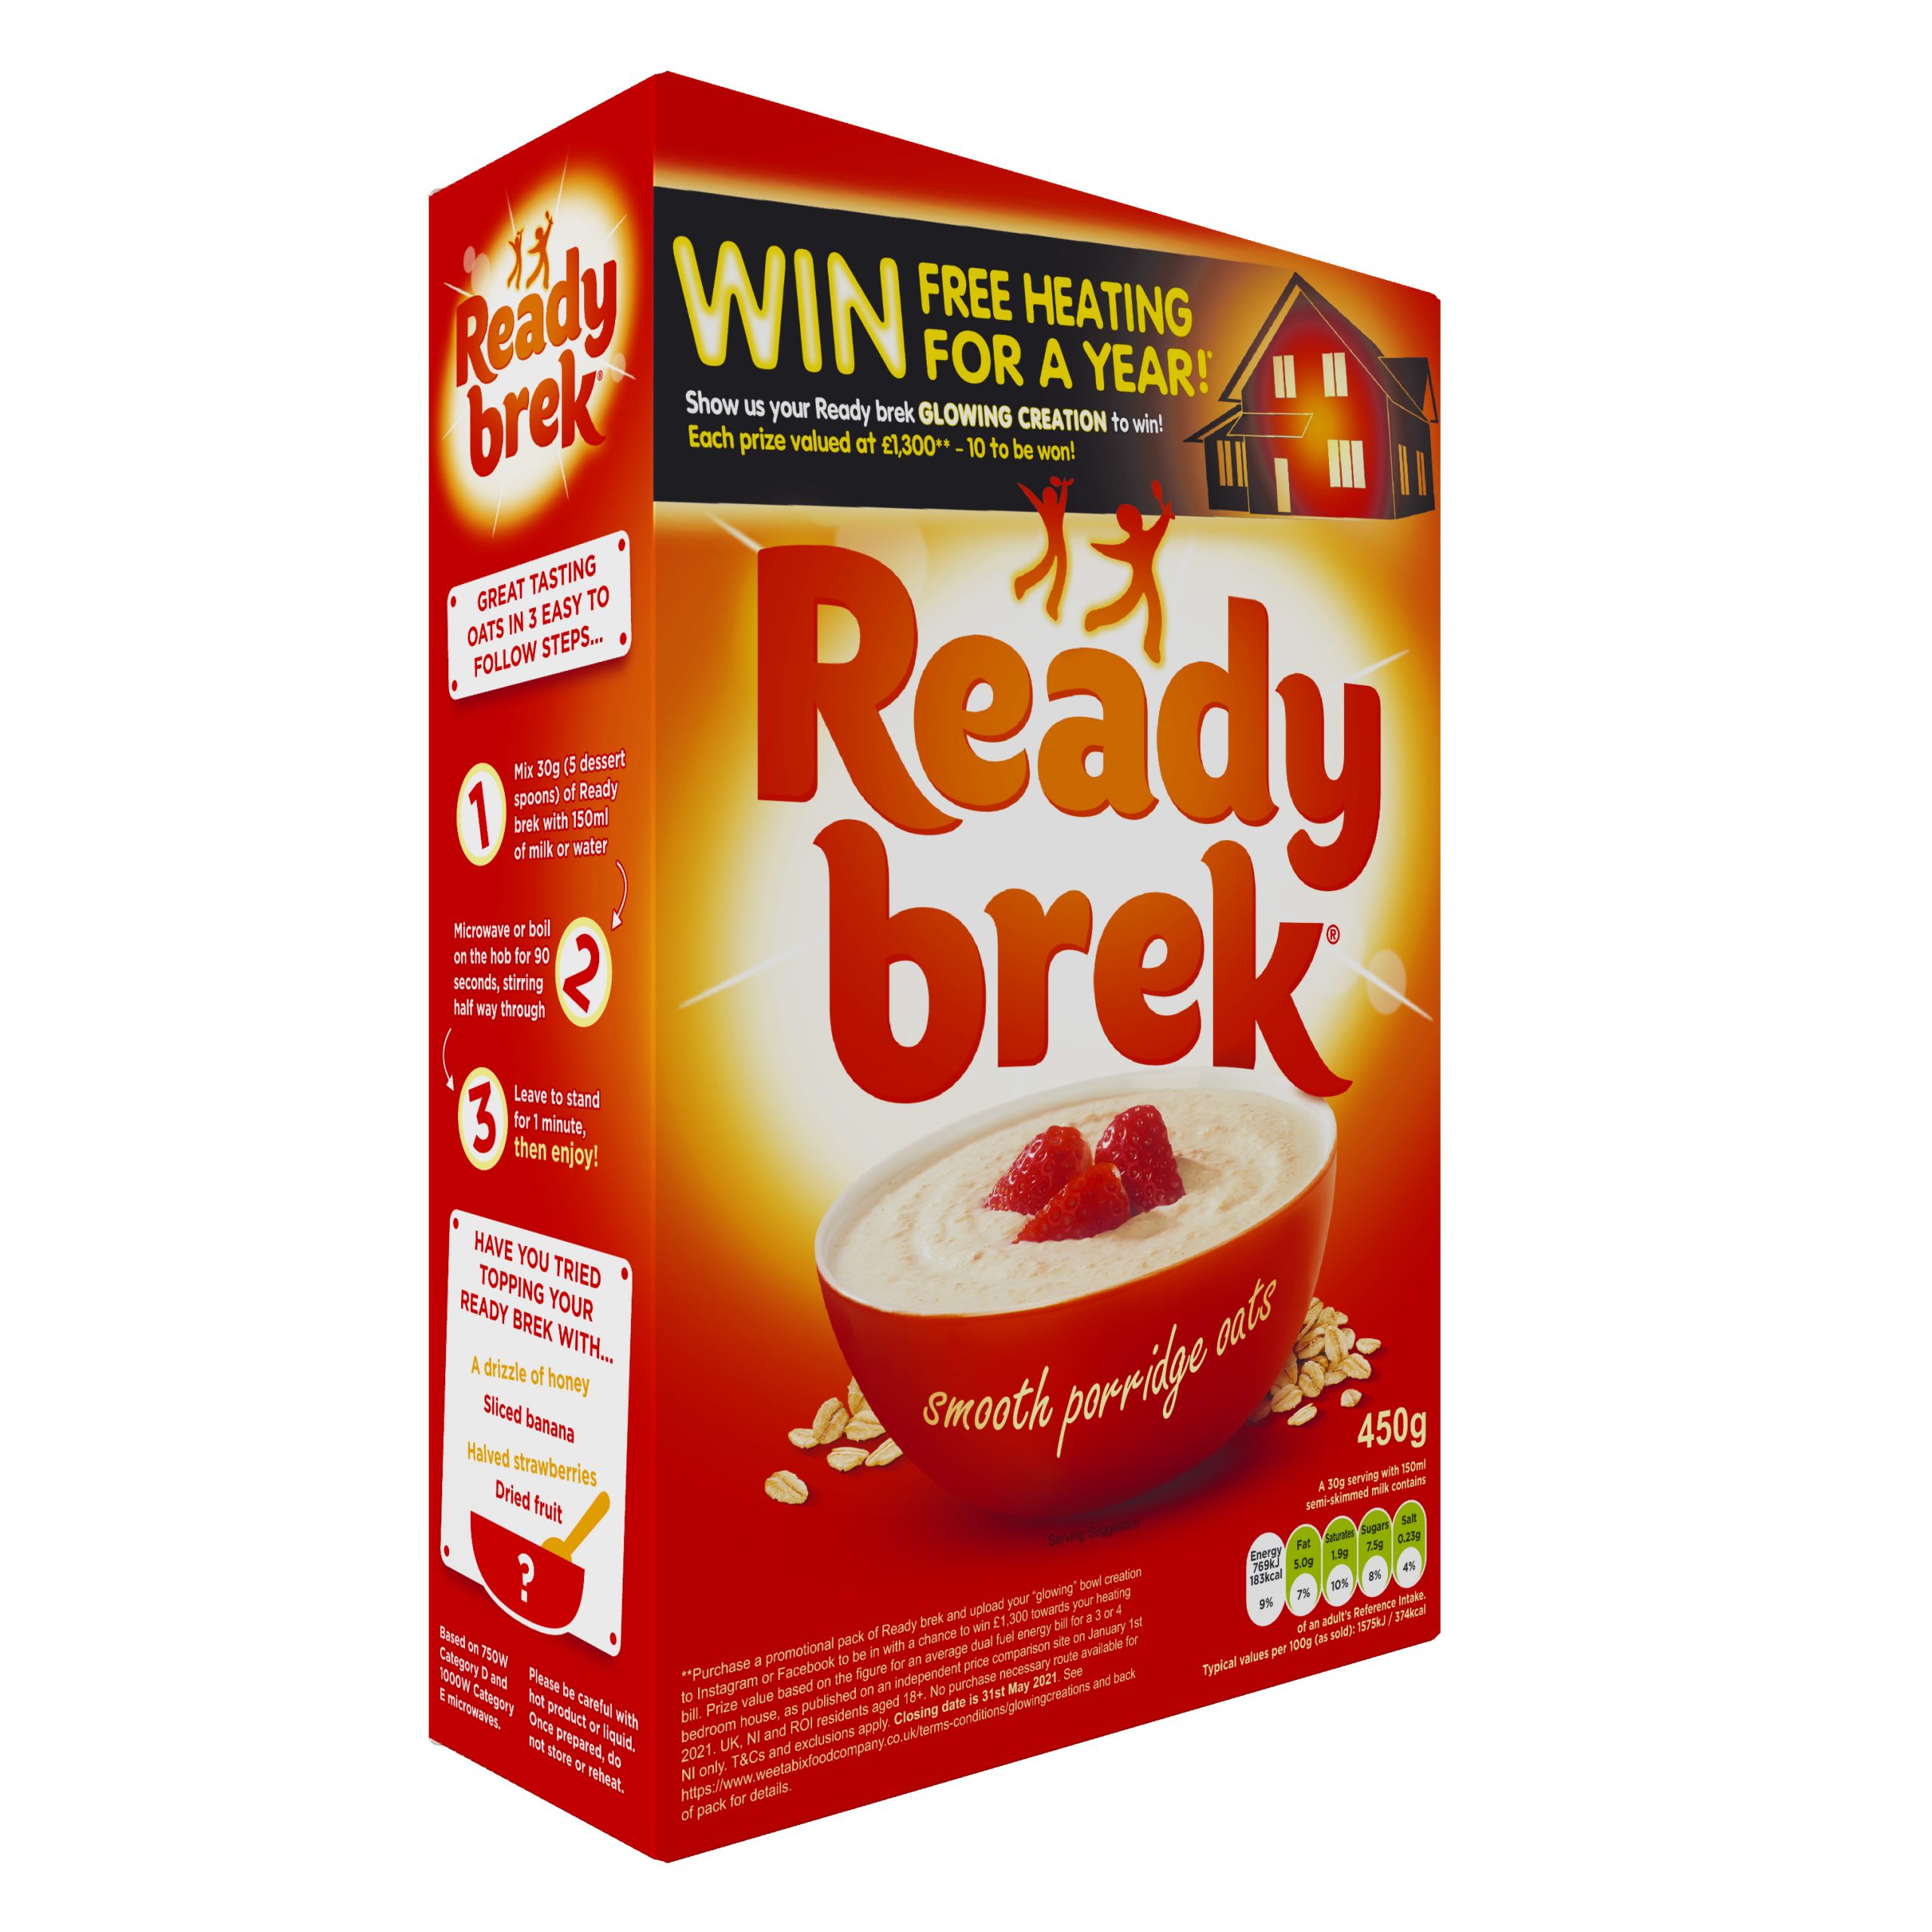 Win free heating for a year with Ready brek